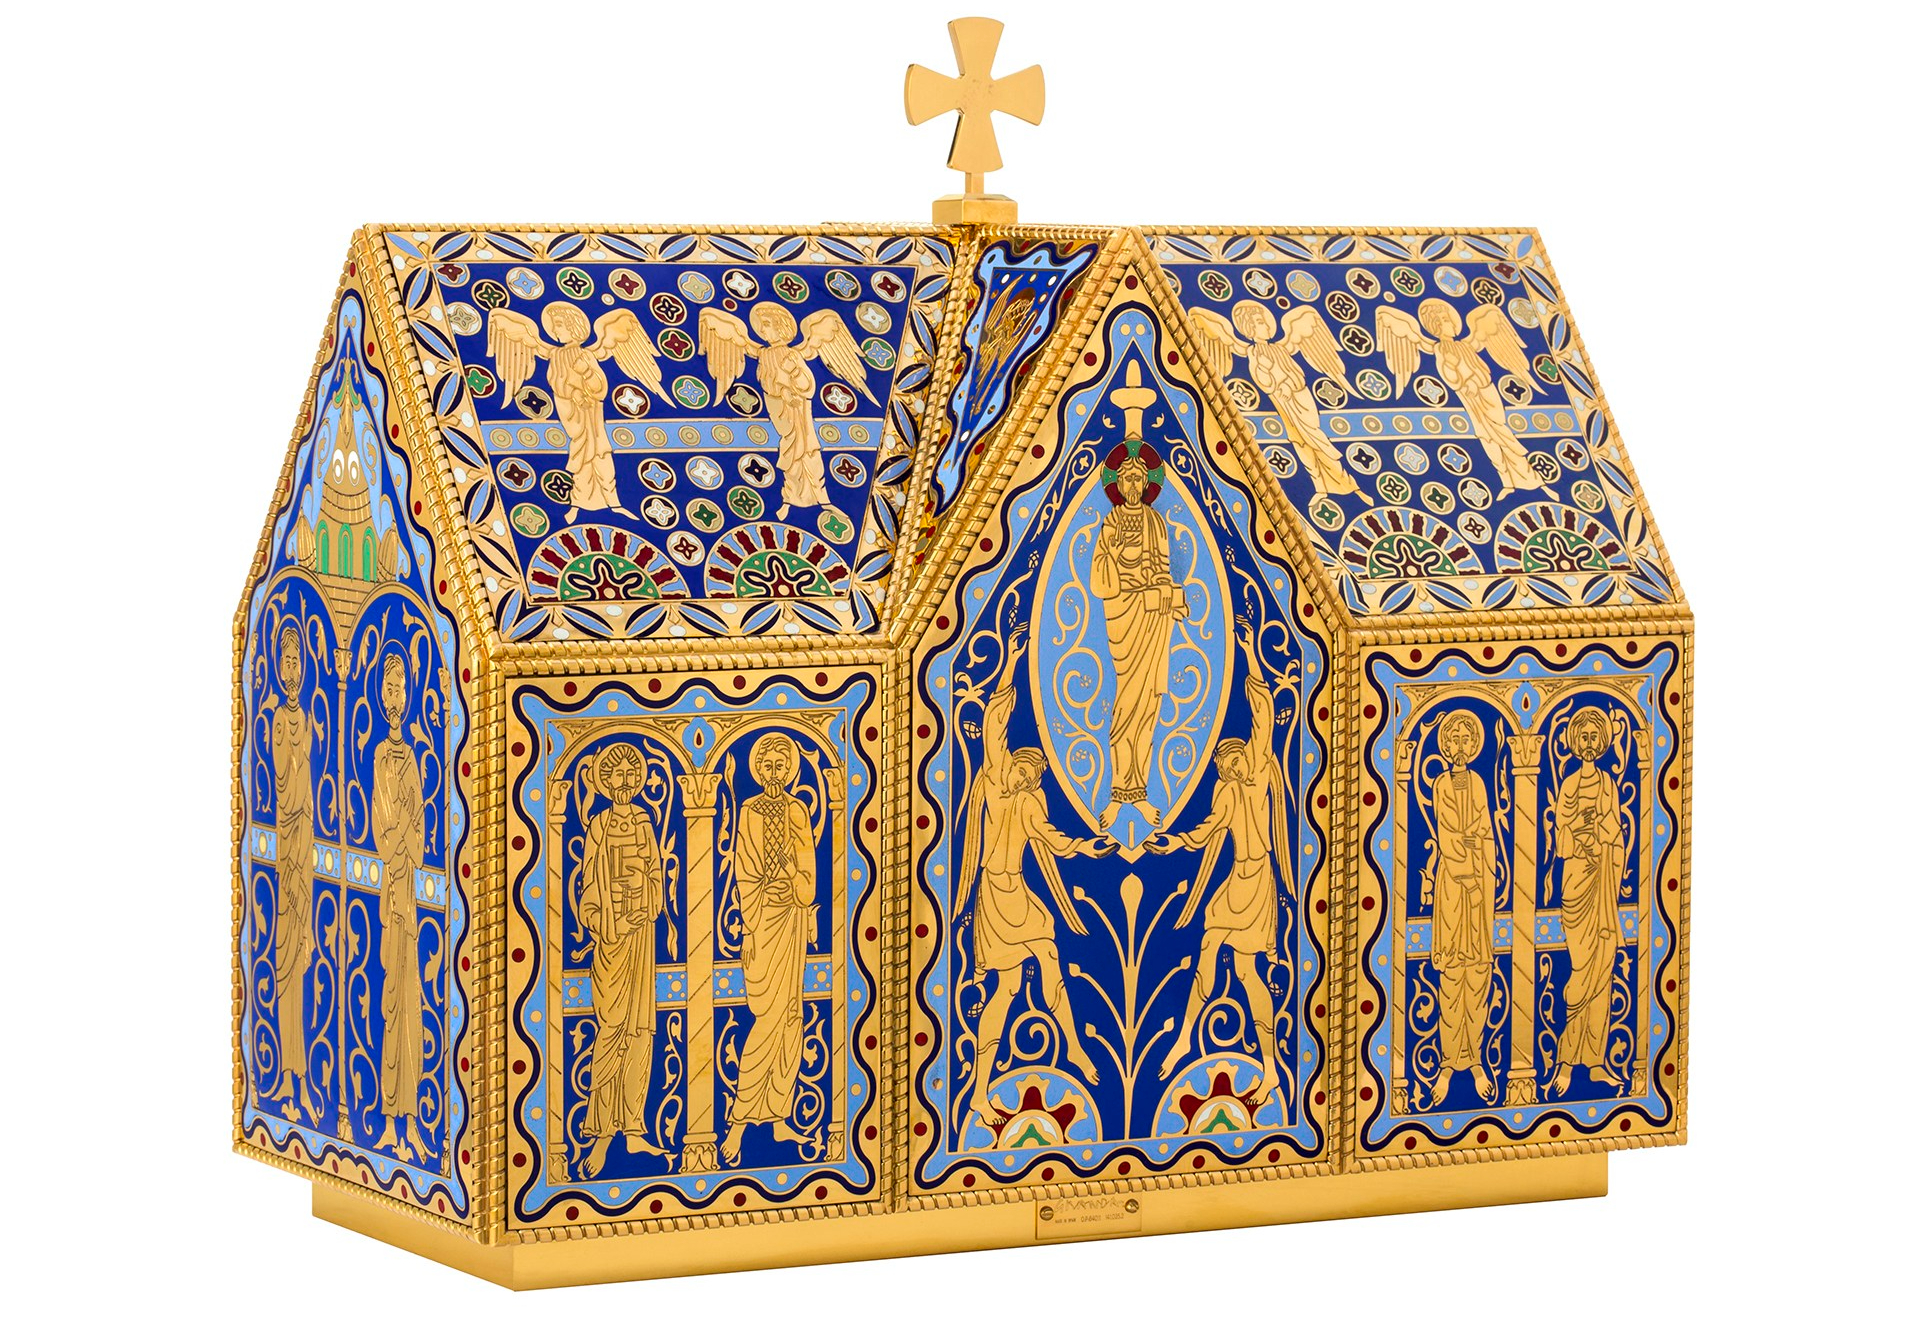 Enamel and gold tabernacle